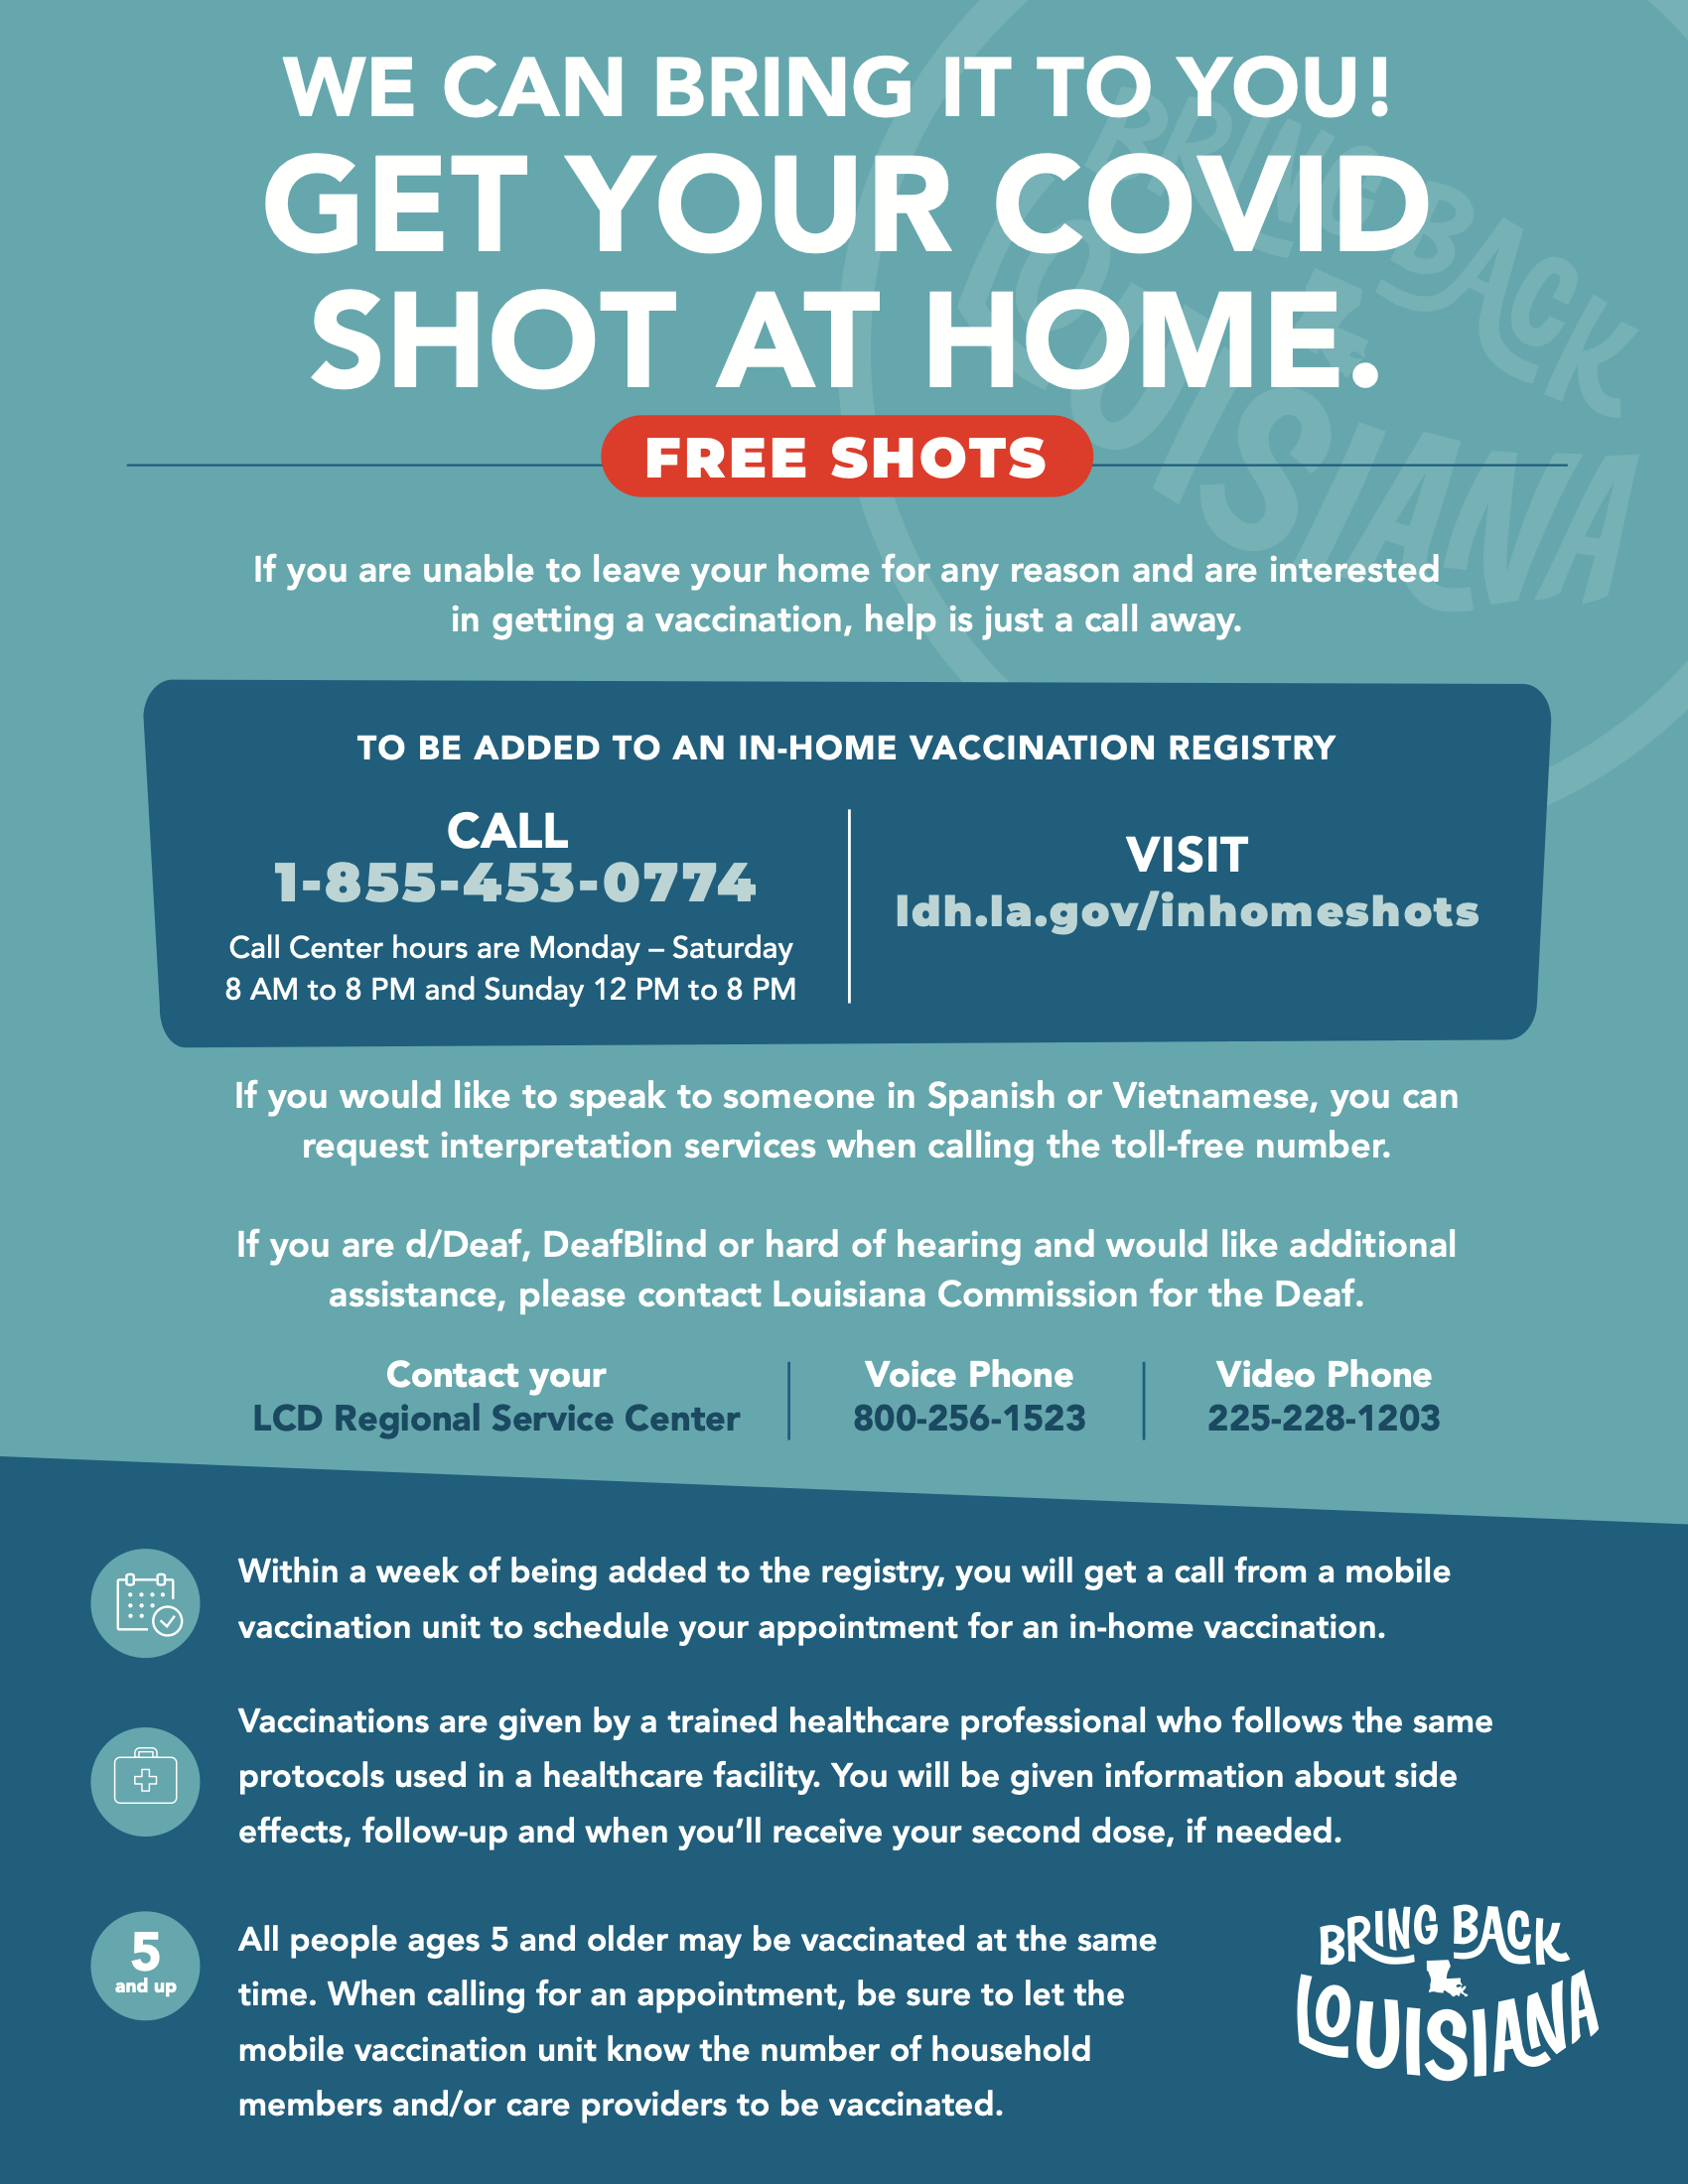 Text on flyer reads: WE CAN BRING IT TO YOU! GET YOUR COVID SHOT AT HOME. FREE SHOTS If you are unable to leave your home for any reason and are interested in getting a vaccination, help is just a call away. TO BE ADDED TO AN IN-HOME VACCINATION REGISTRY CALL 1-855-453-0774VISIT ldh.la.gov/inhomeshots Call Center hours are Monday – Saturday 8 AM to 8 PM and Sunday 12 PM to 8 PM If you would like to speak to someone in Spanish or Vietnamese, you can request interpretation services when calling the toll-free number. If you are d/Deaf, DeafBlind or hard of hearing and would like additional assistance, please contact Louisiana Commission for the Deaf. Contact yourVoice PhoneVideo Phone LCD Regional Service Center800-256-1523225-228-1203 Within a week of being added to the registry, you will get a call from a mobile vaccination unit to schedule your appointment for an in-home vaccination. Vaccinations are given by a trained healthcare professional who follows the same protocols used in a healthcare facility. You will be given information about side effects, follow-up and when you’ll receive your second dose, if needed. All people ages 5 and older may be vaccinated at the same and up5time. When calling for an appointment, be sure to let the mobile vaccination unit know the number of household members and/or care providers to be vaccinated.